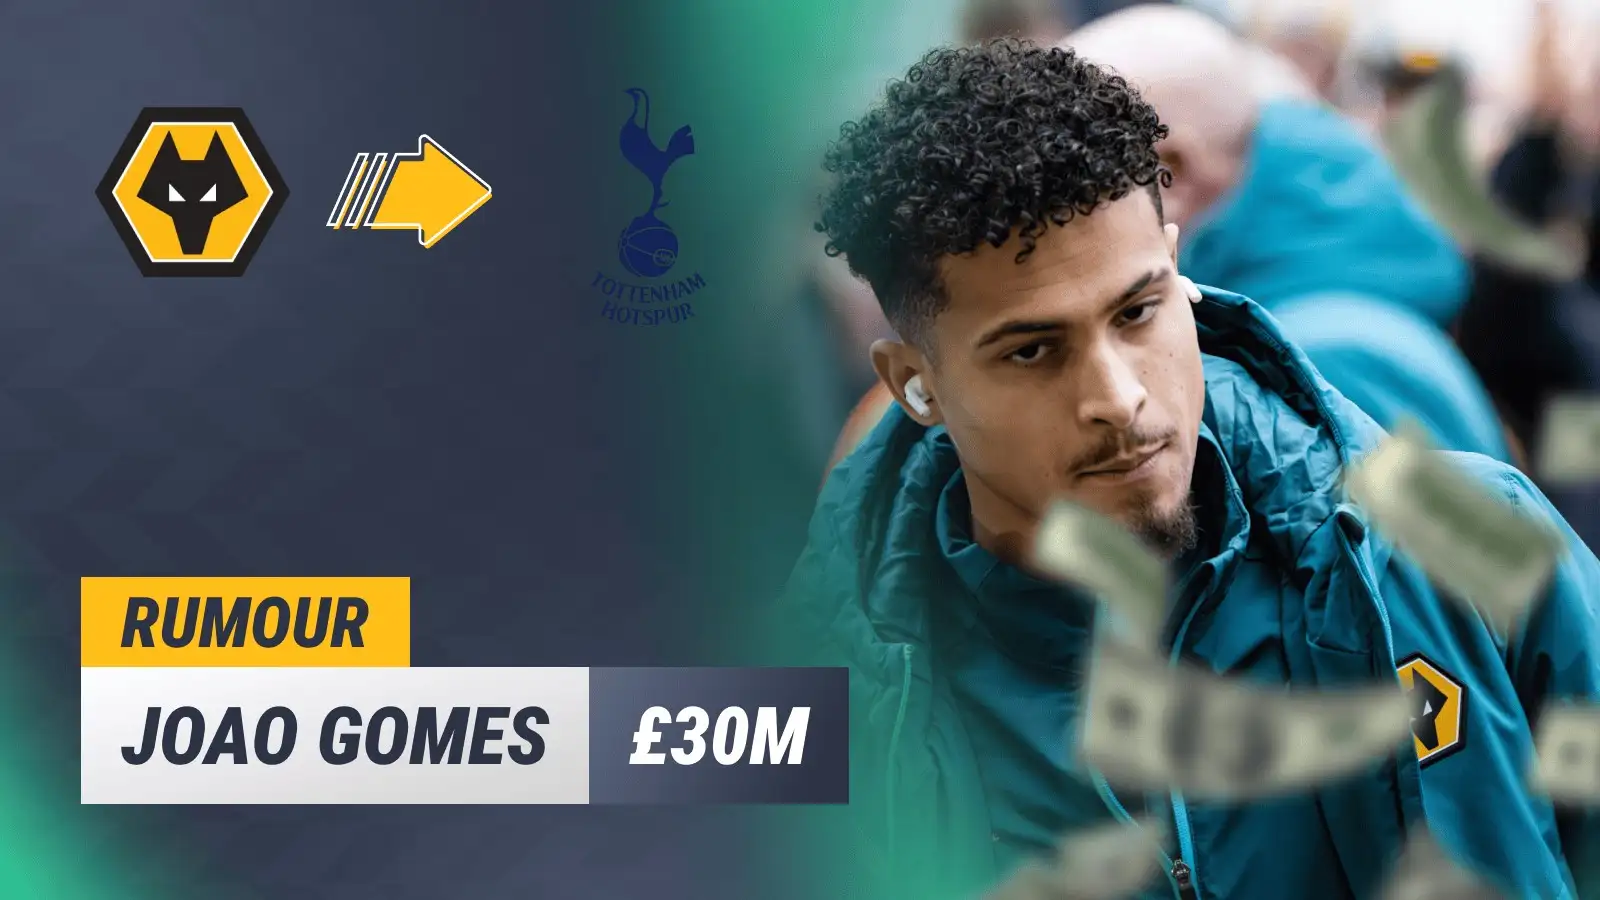 Joao Gomes of Wolves is being linked with a move to Tottenham